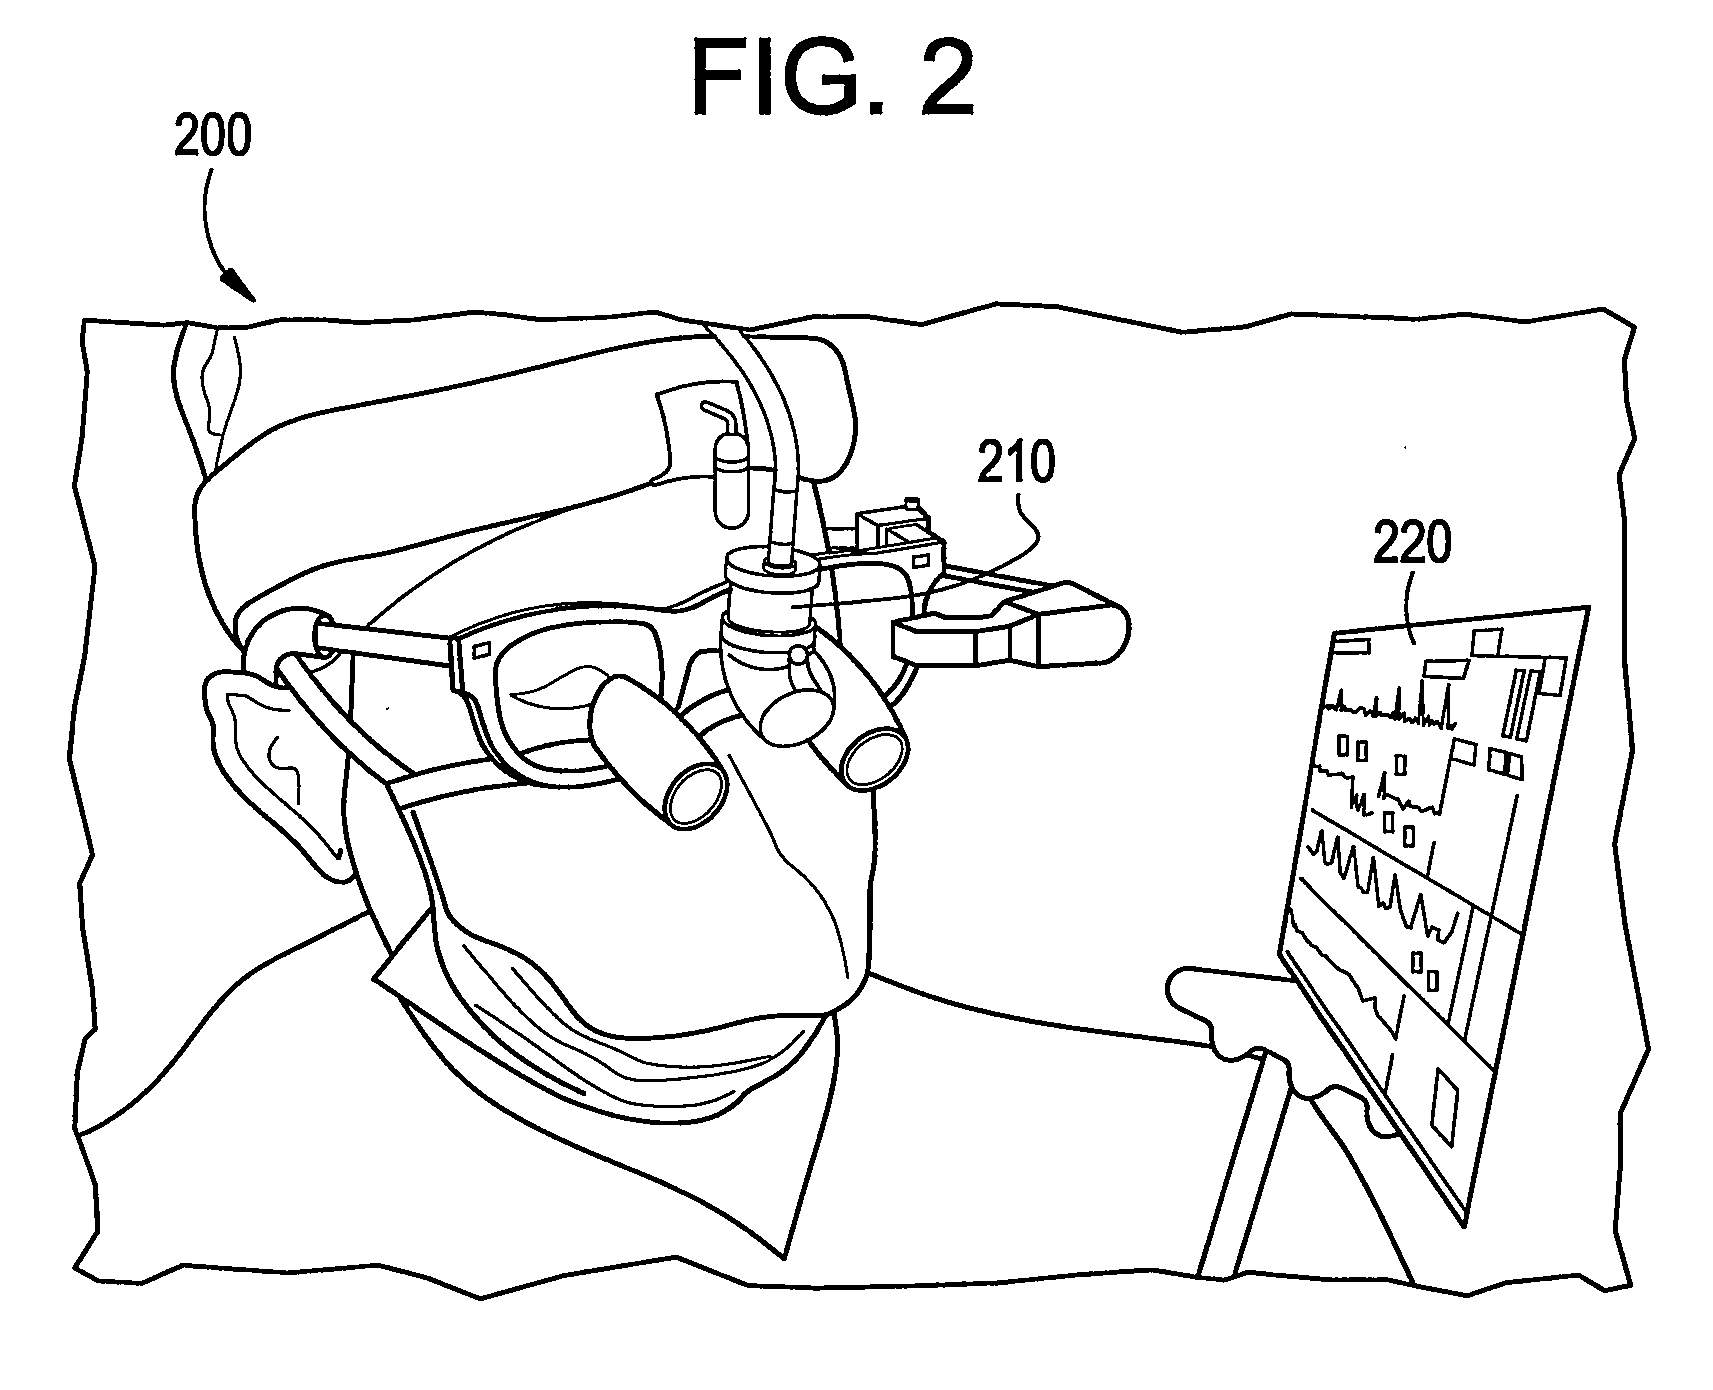 Methods and systems for creation of hanging protocols using eye tracking and voice command and control